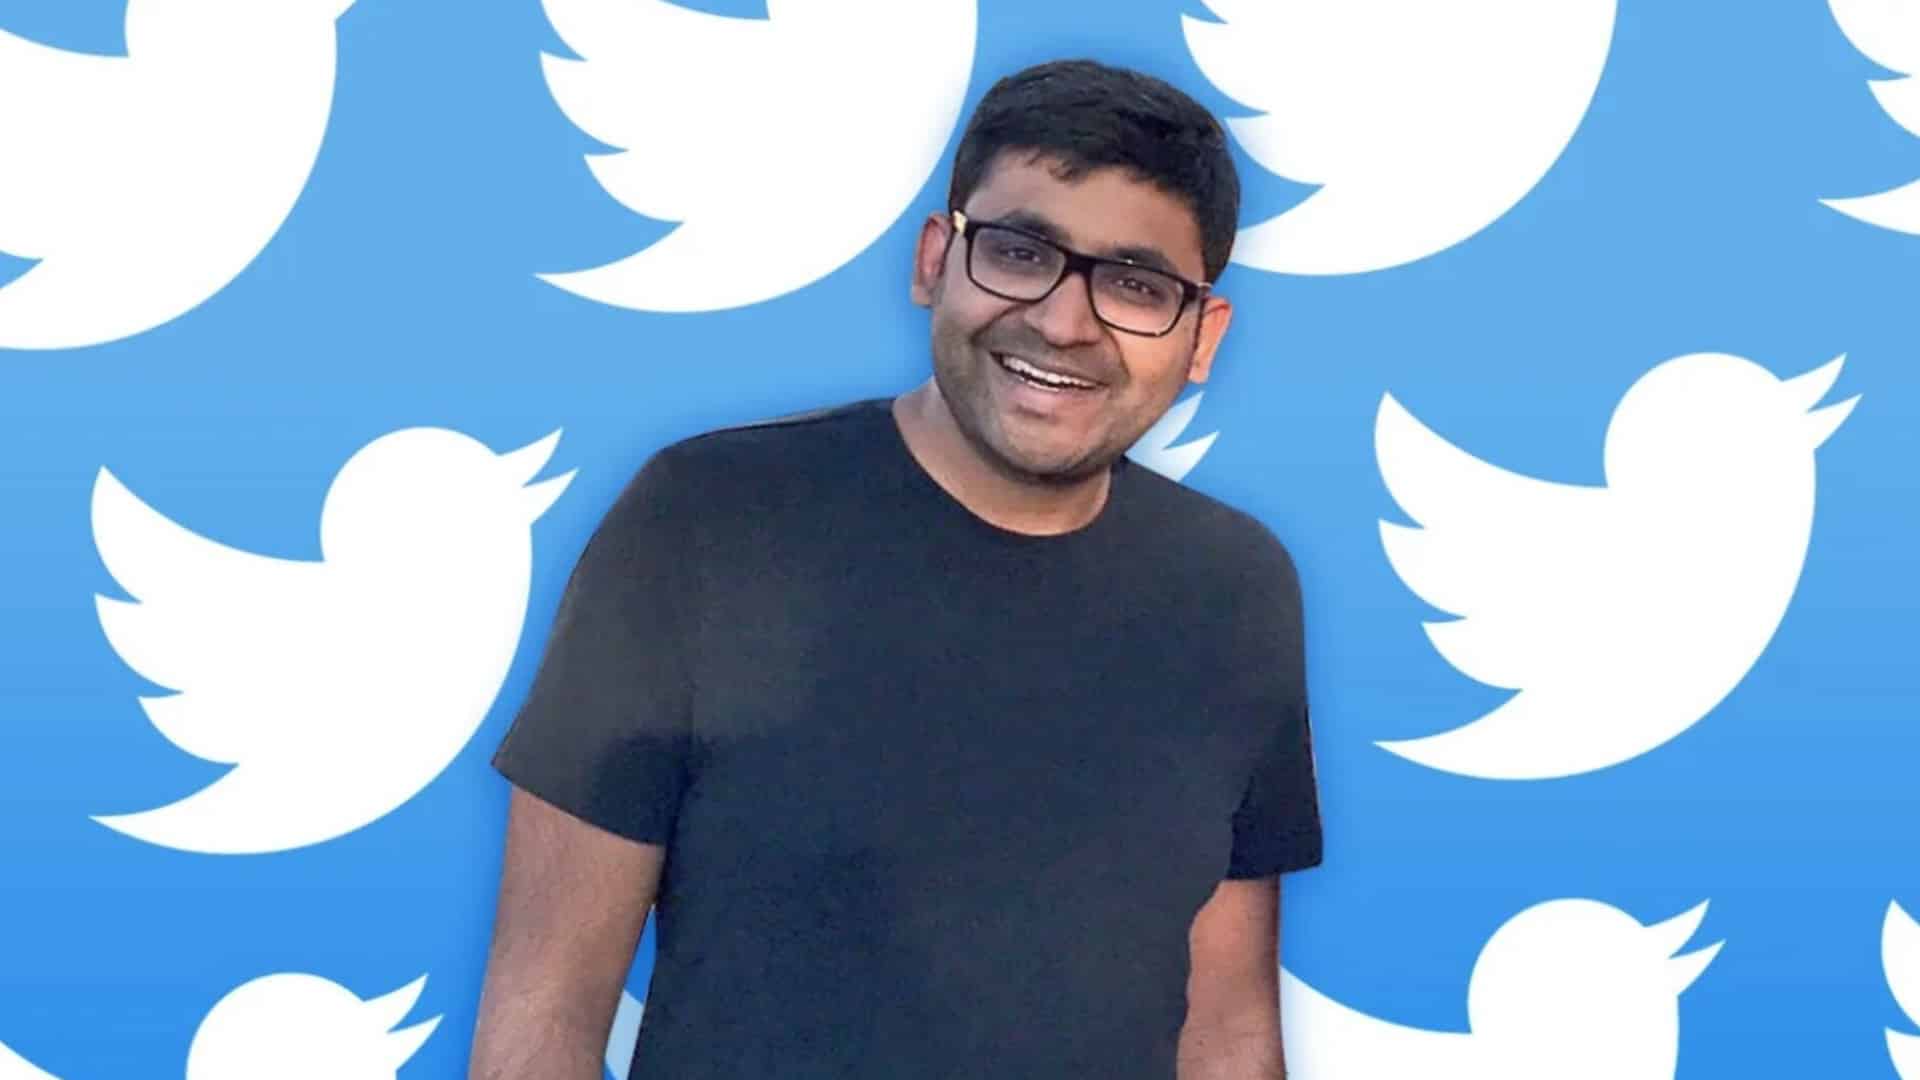 Don't know what direction Twitter will go in: CEO Parag Agrawal tells employees after Elon Musk takeover